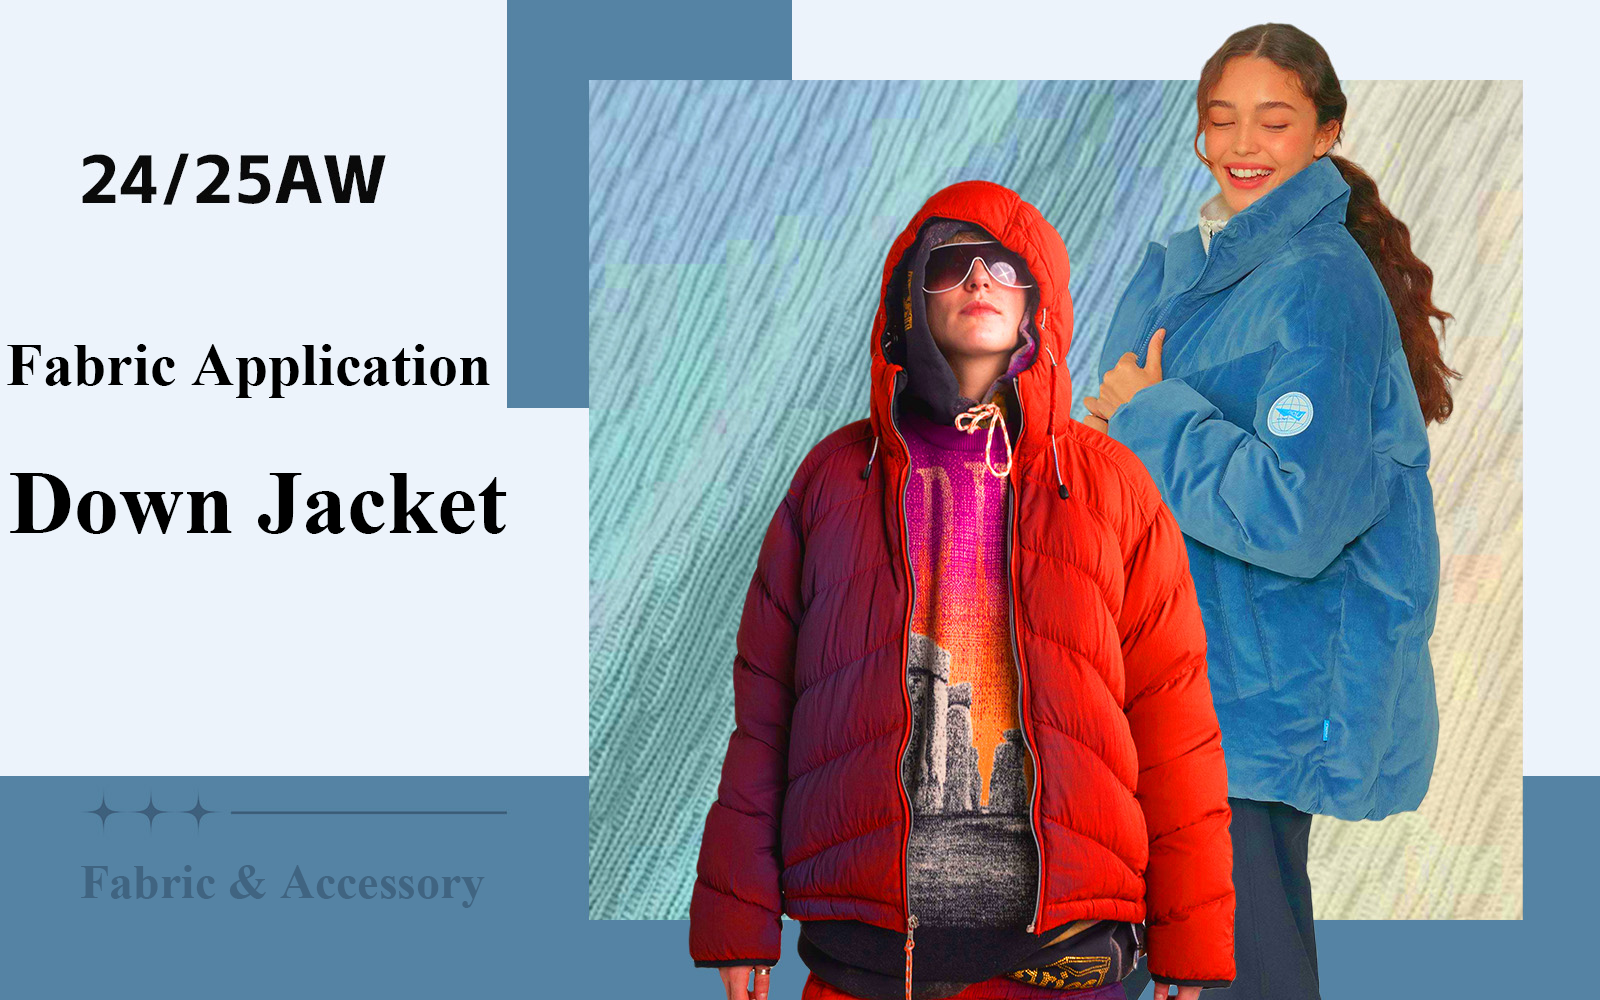 Innovative Texture -- The Fabric Trend for Down Jacket